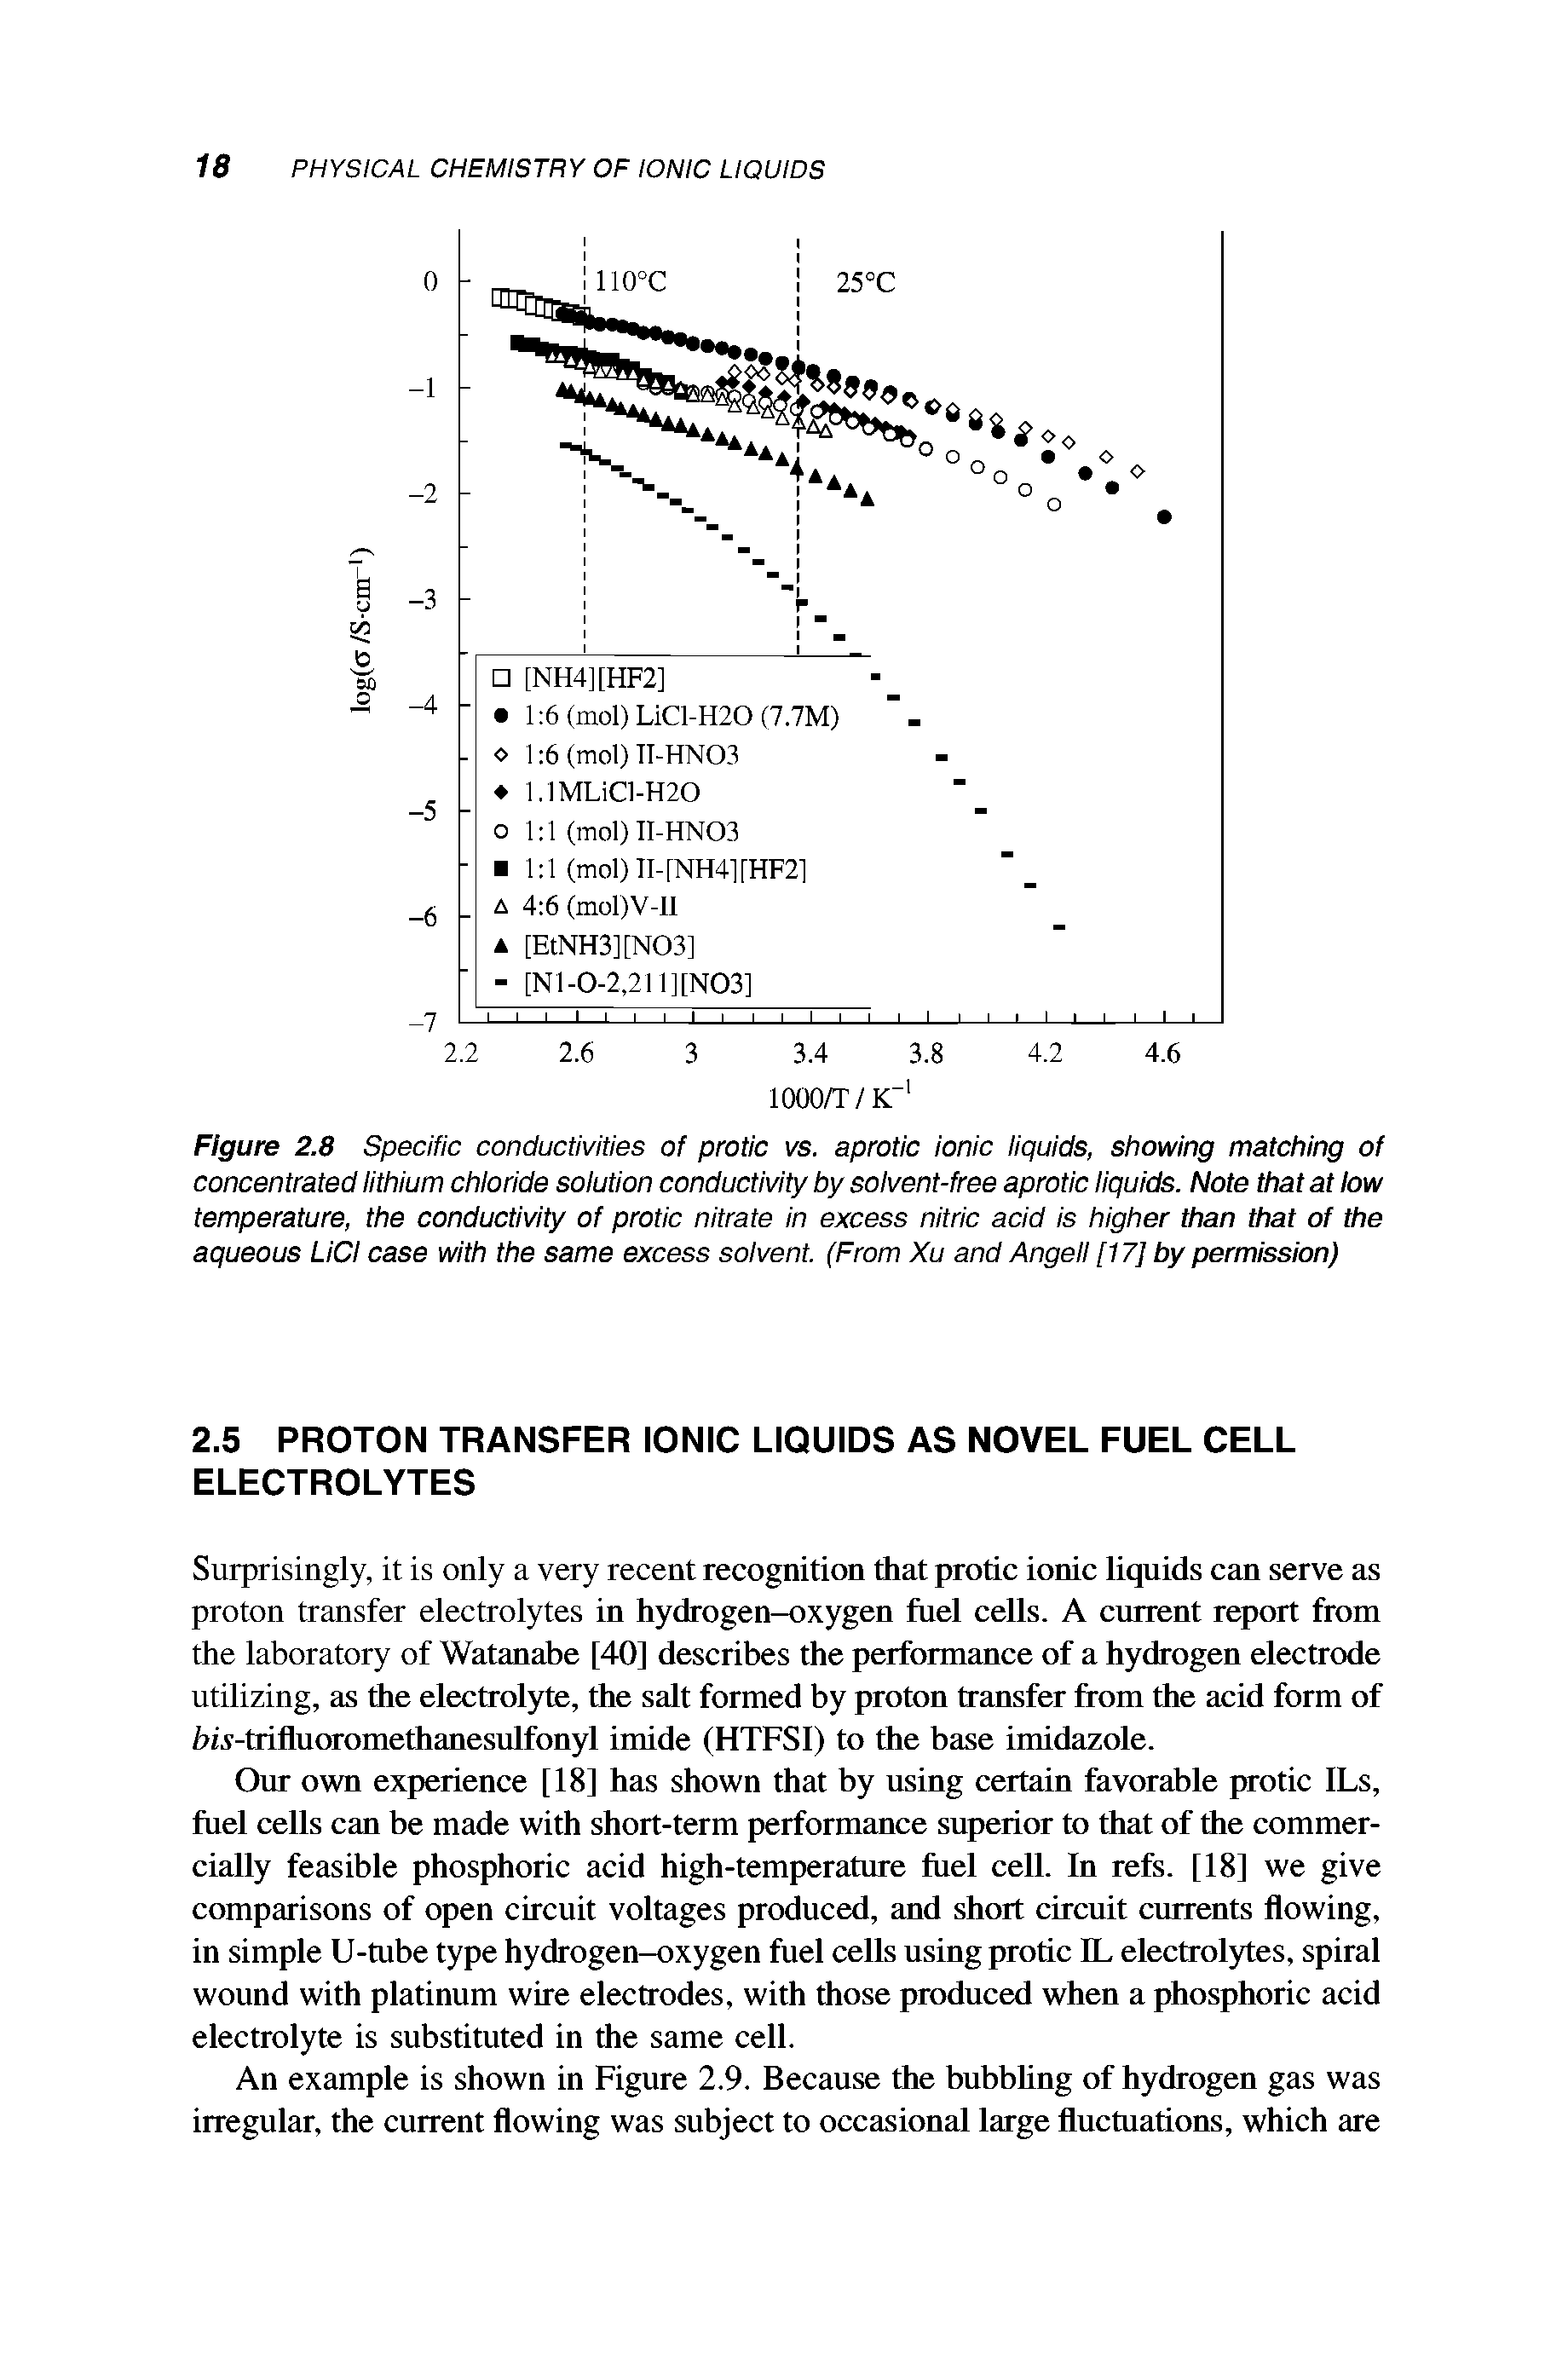 Figure 2.8 Specific conductivities of protic vs. aprotic ionic liquids, showing matching of concentrated lithium chloride solution conductivity by solvent-free aprotic liquids. Note that at low temperature, the conductivity of protic nitrate in excess nitric acid is higher than that of the aqueous Lid case with the same excess solvent. (From Xu and Angell [17] by permission)...